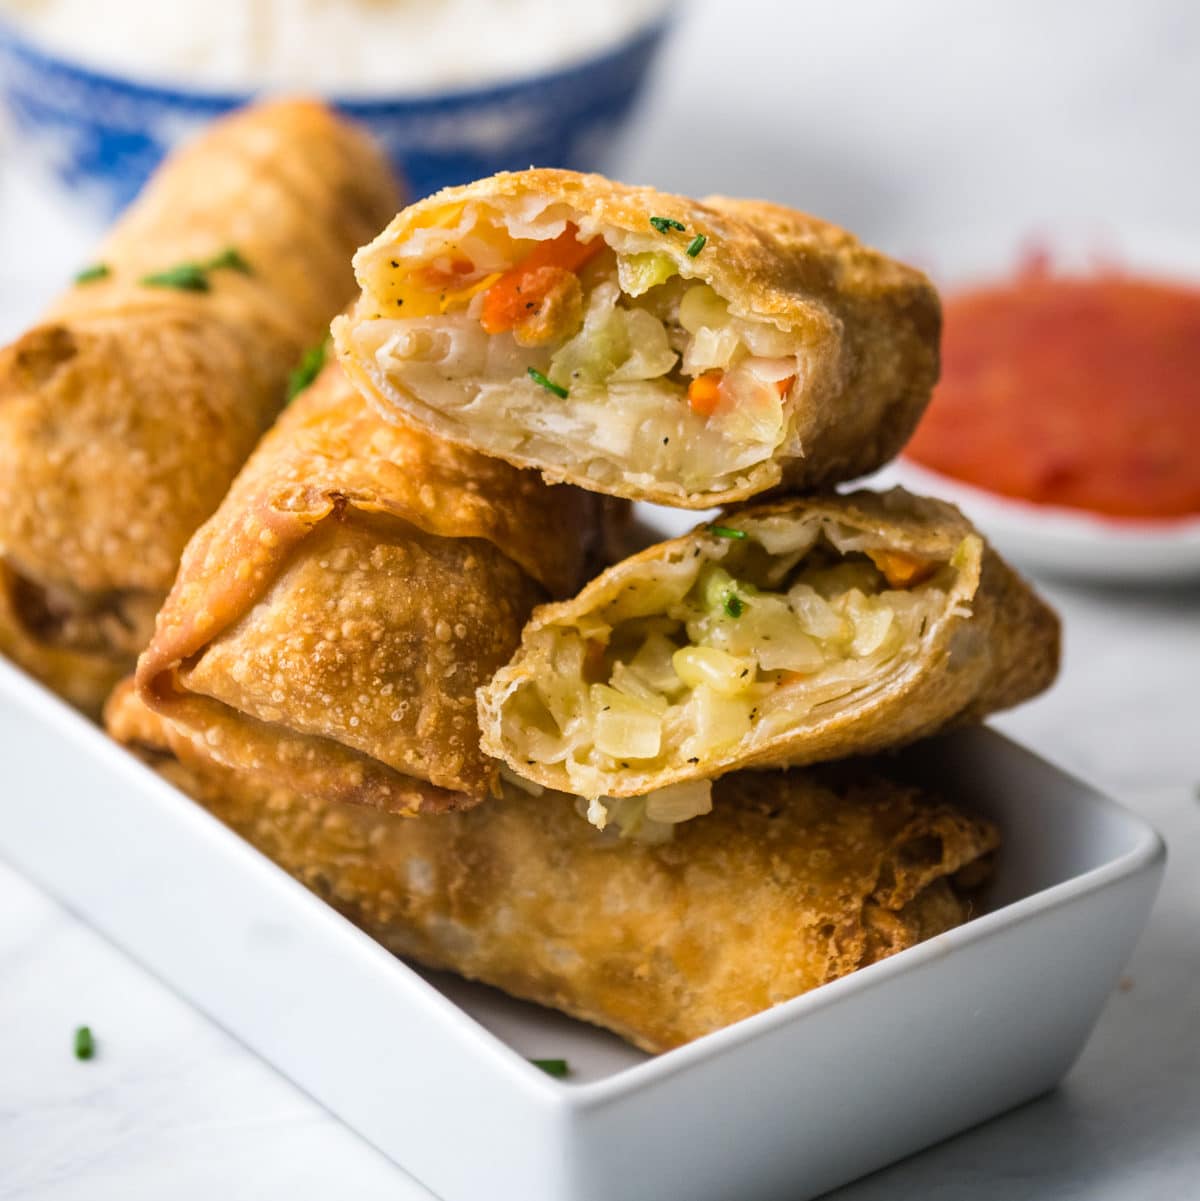 egg rolls stacked and ready for eating